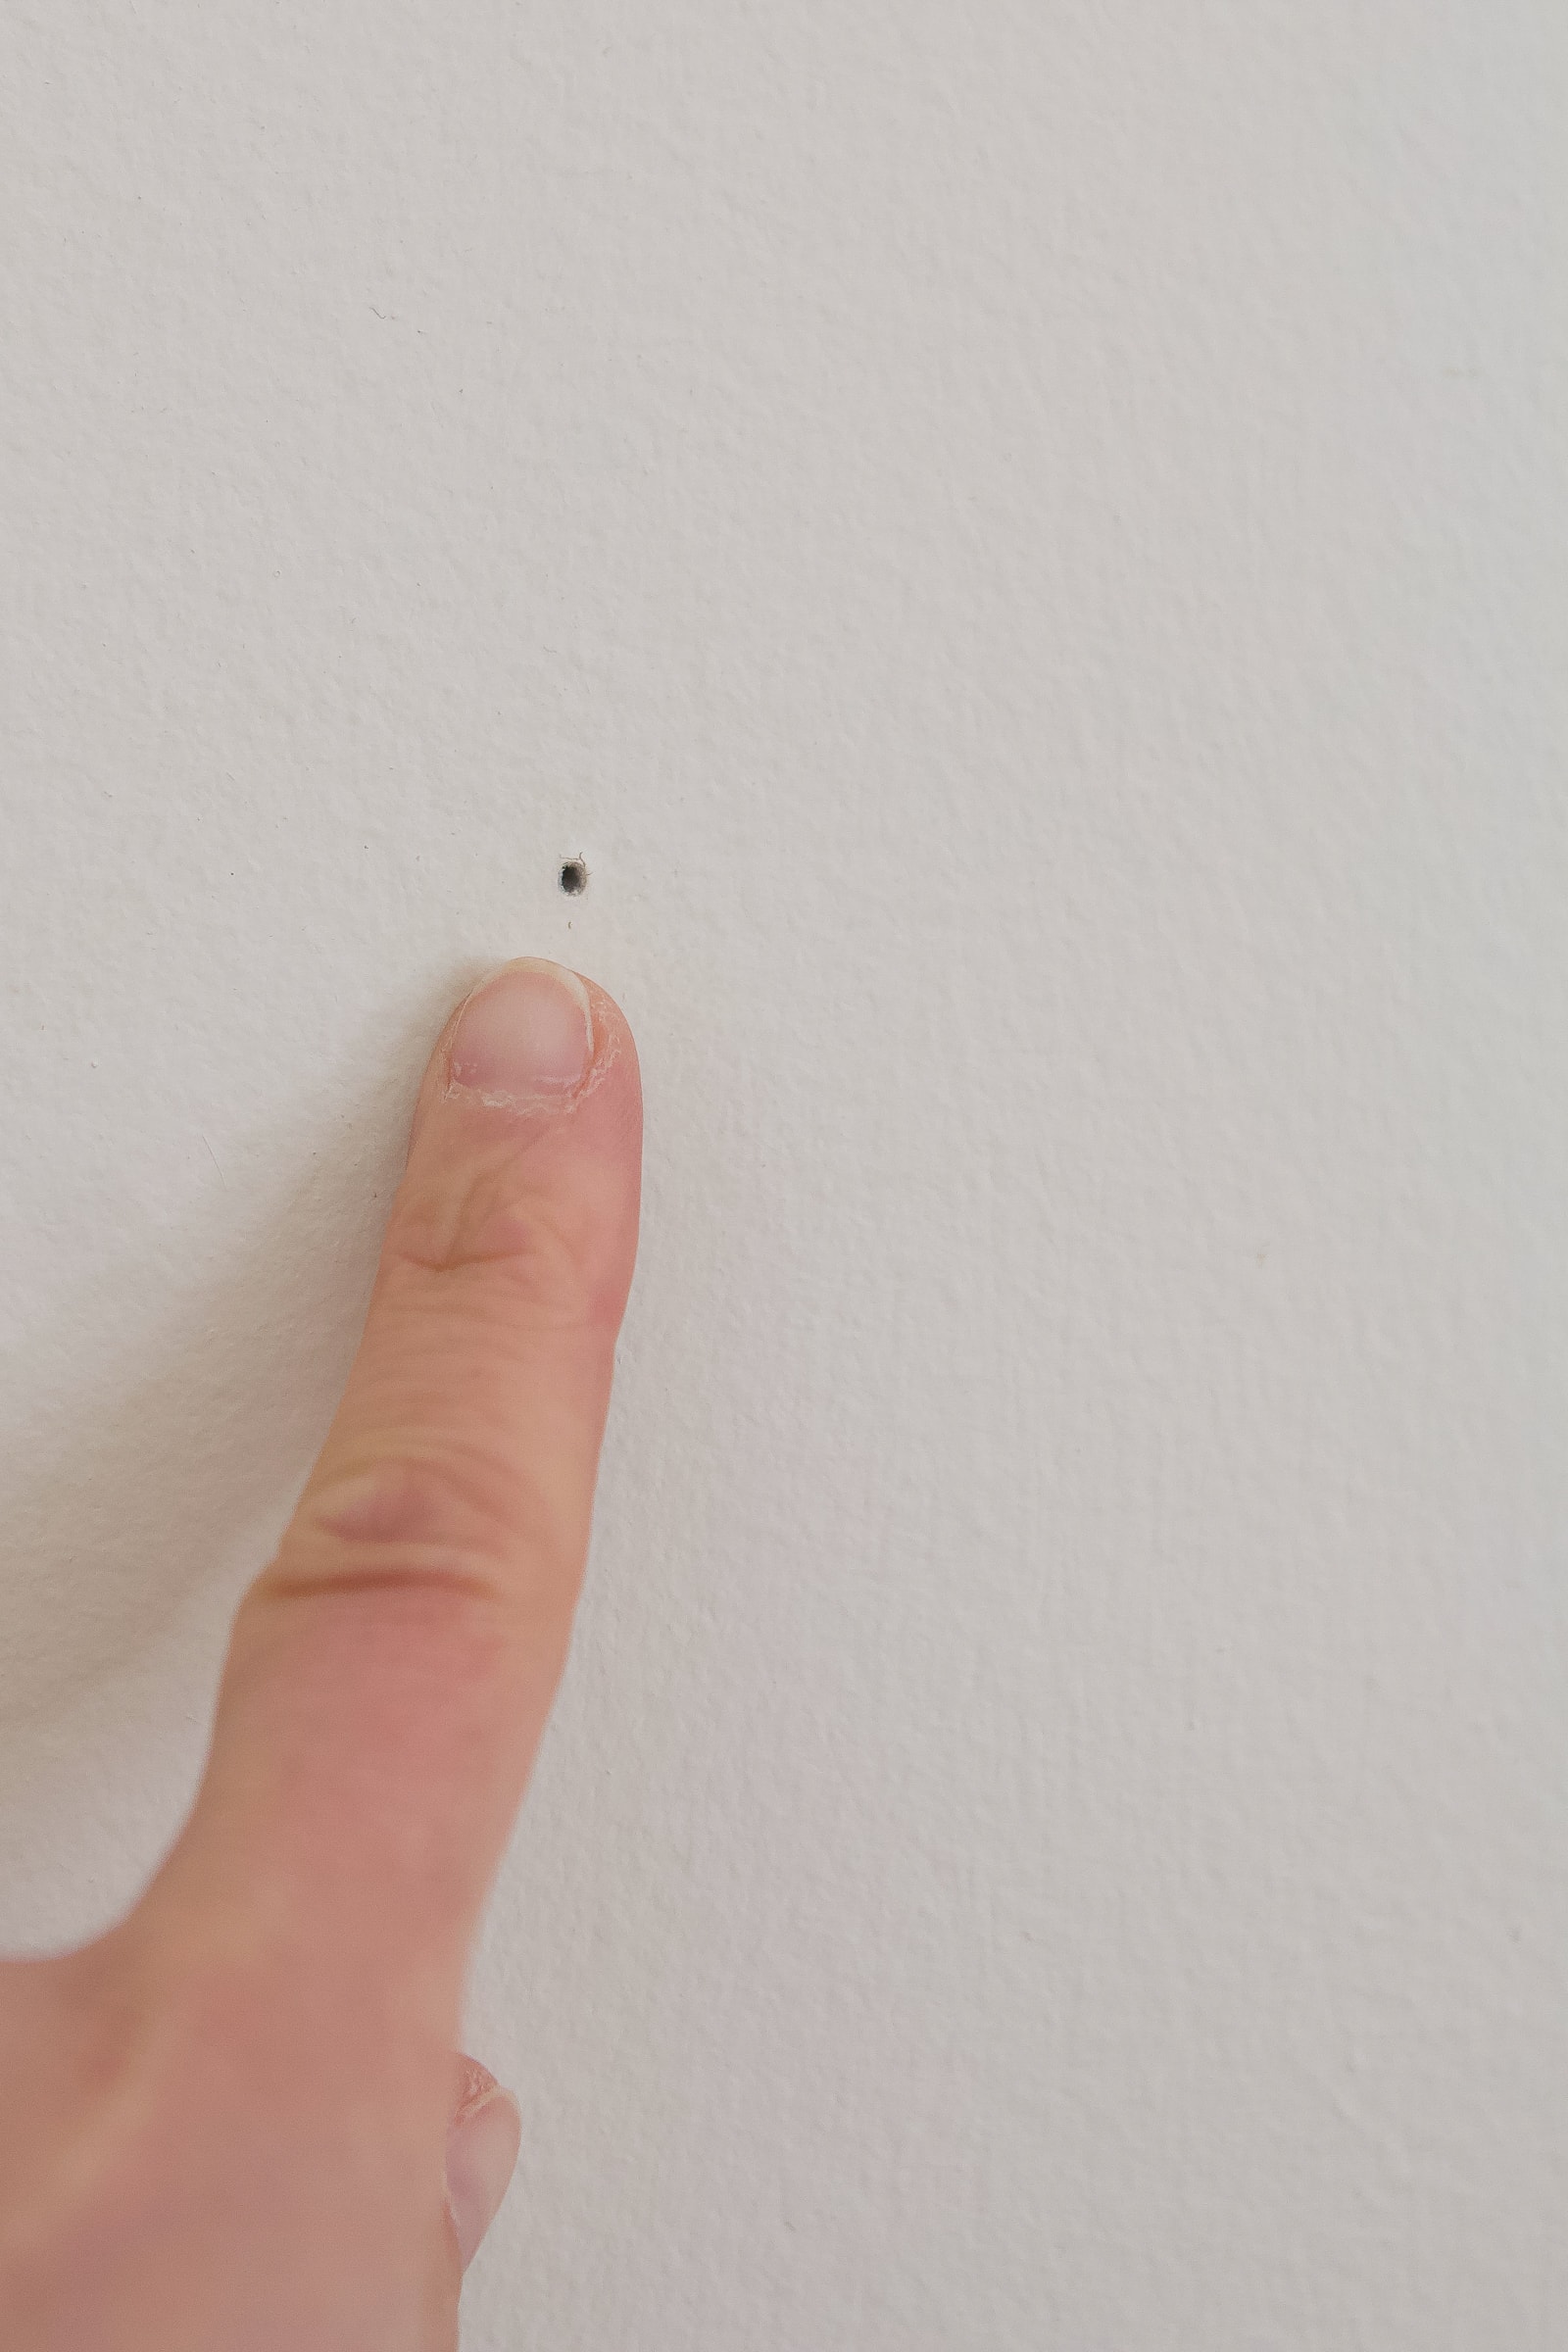 My best tips to fill nail holes in drywall